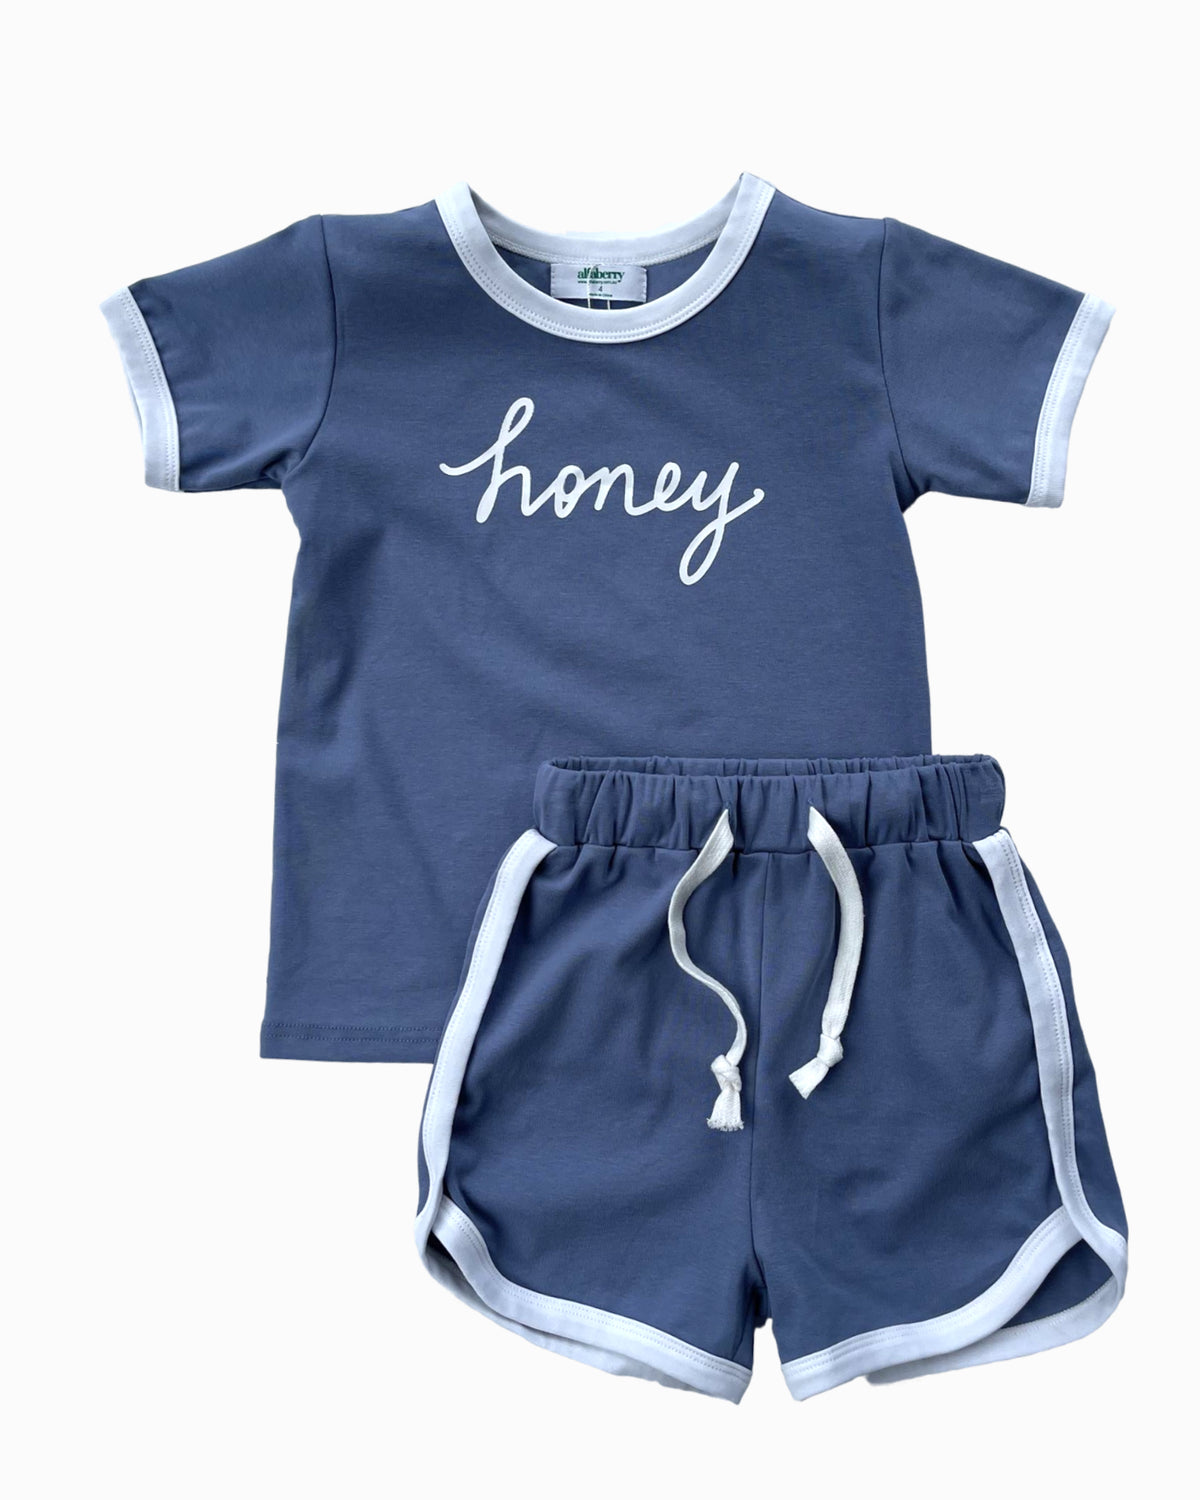 Honey Slogan Ringer Tee and Track Shorts Set in Blue